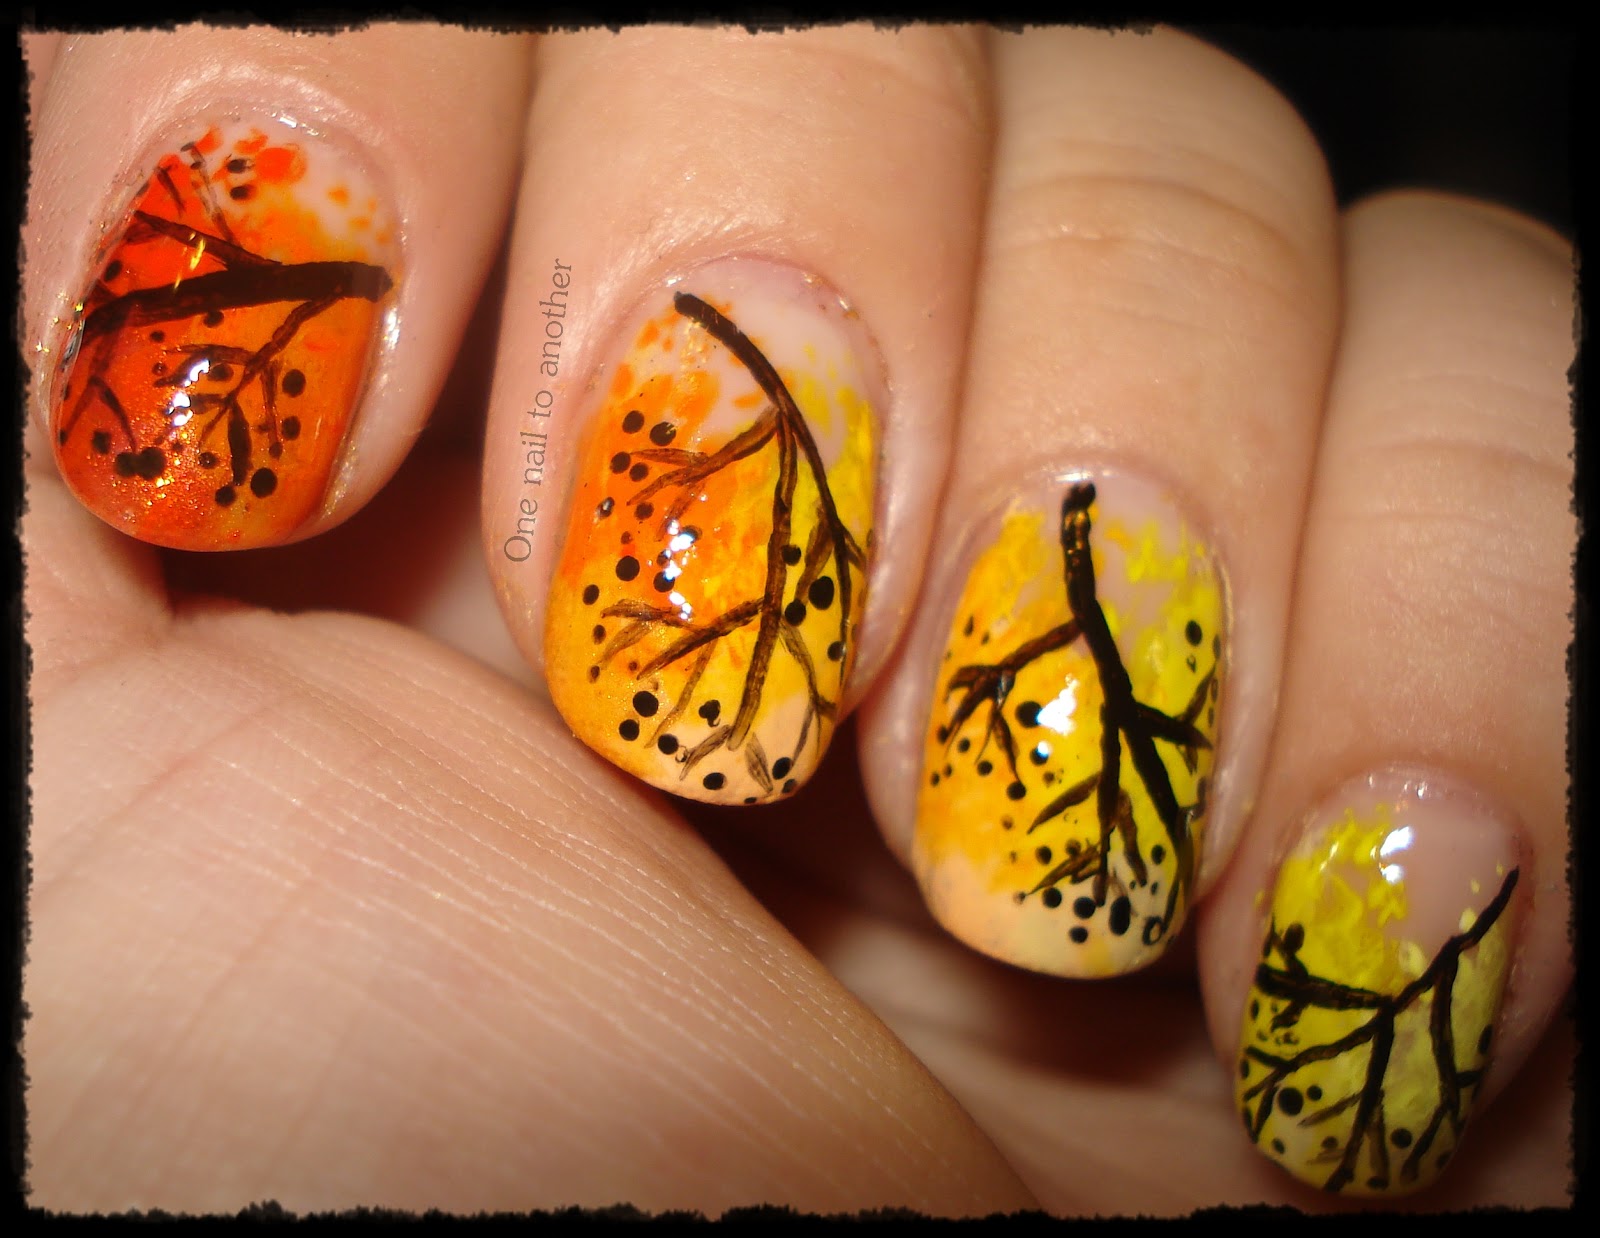 One Nail To Another: Fall into Autumn: Autmn Ombre/Gradient